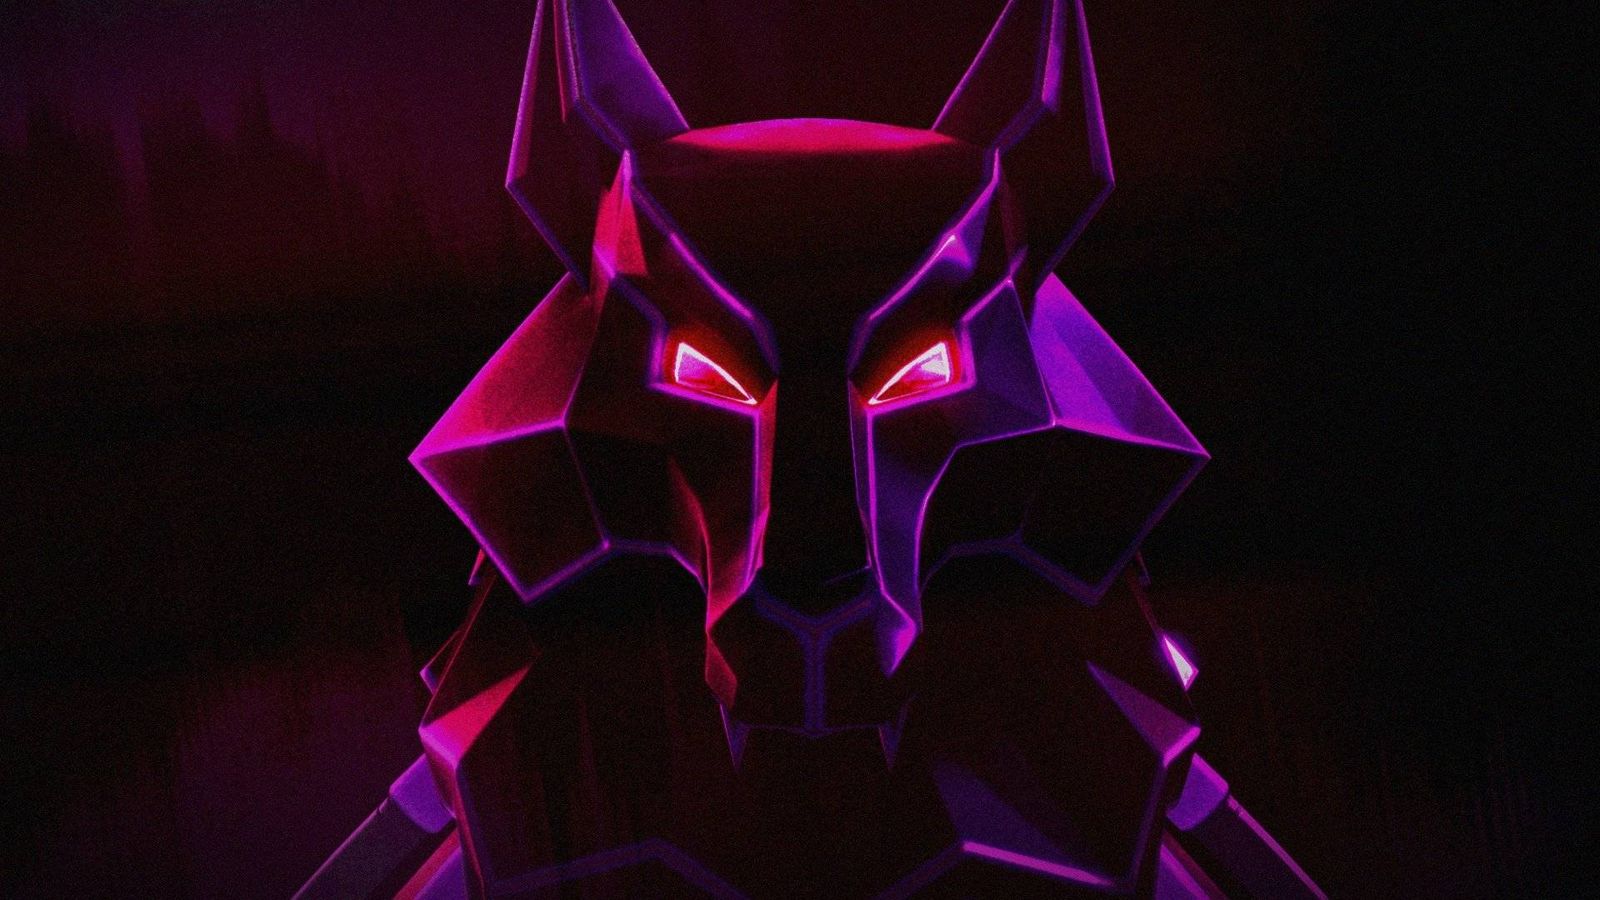 the fortnitemares promo image for 2022 which features a neon geometric fox mask